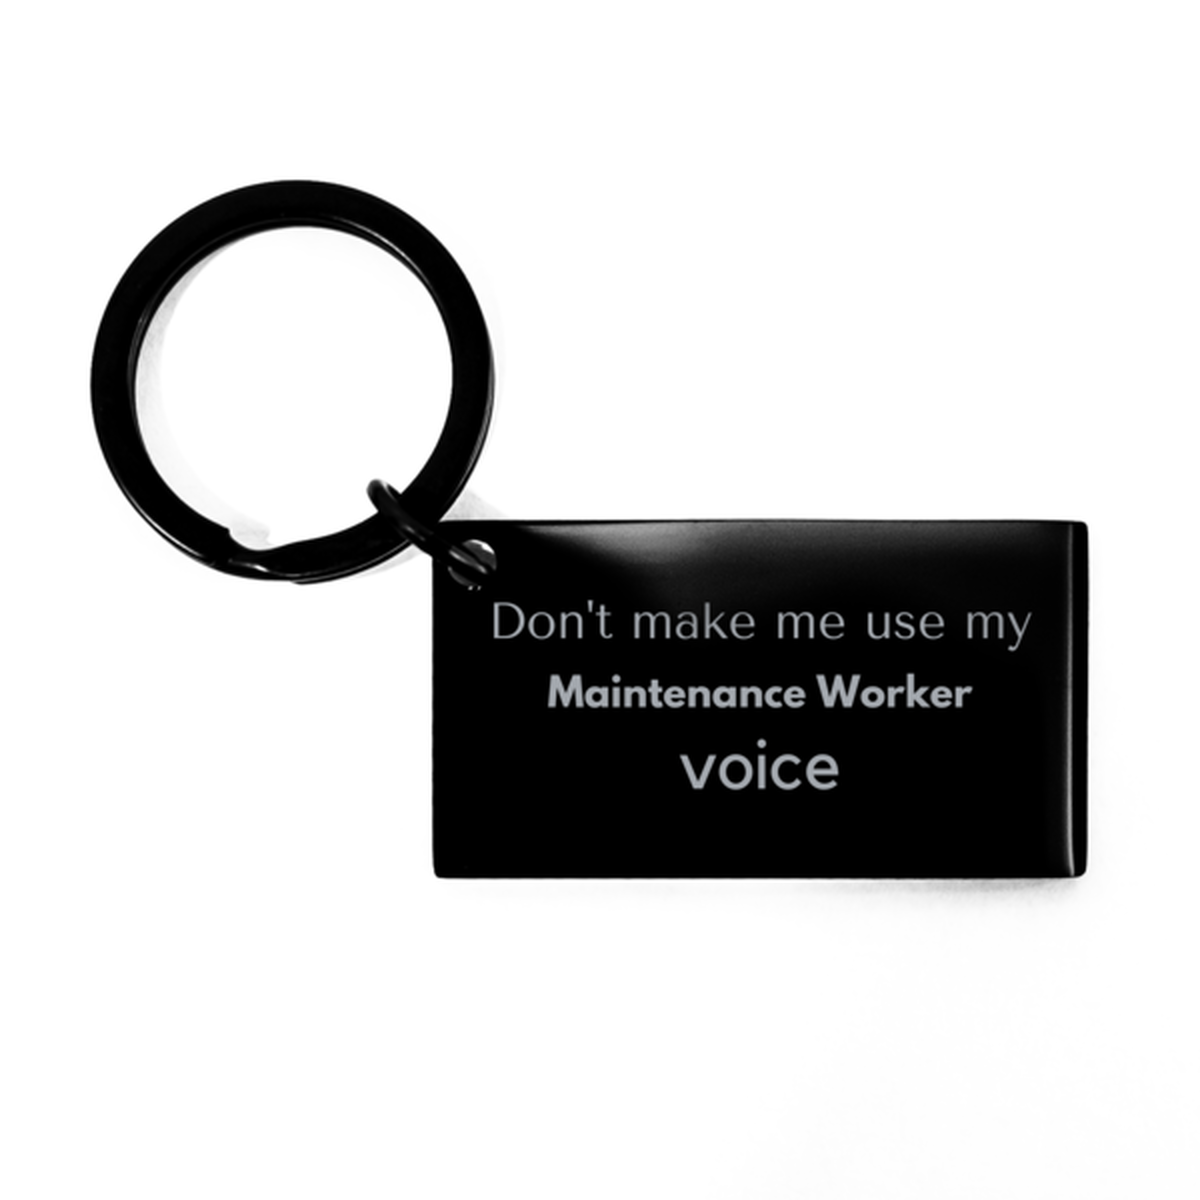 Don't make me use my Maintenance Worker voice, Sarcasm Maintenance Worker Gifts, Christmas Maintenance Worker Keychain Birthday Unique Gifts For Maintenance Worker Coworkers, Men, Women, Colleague, Friends